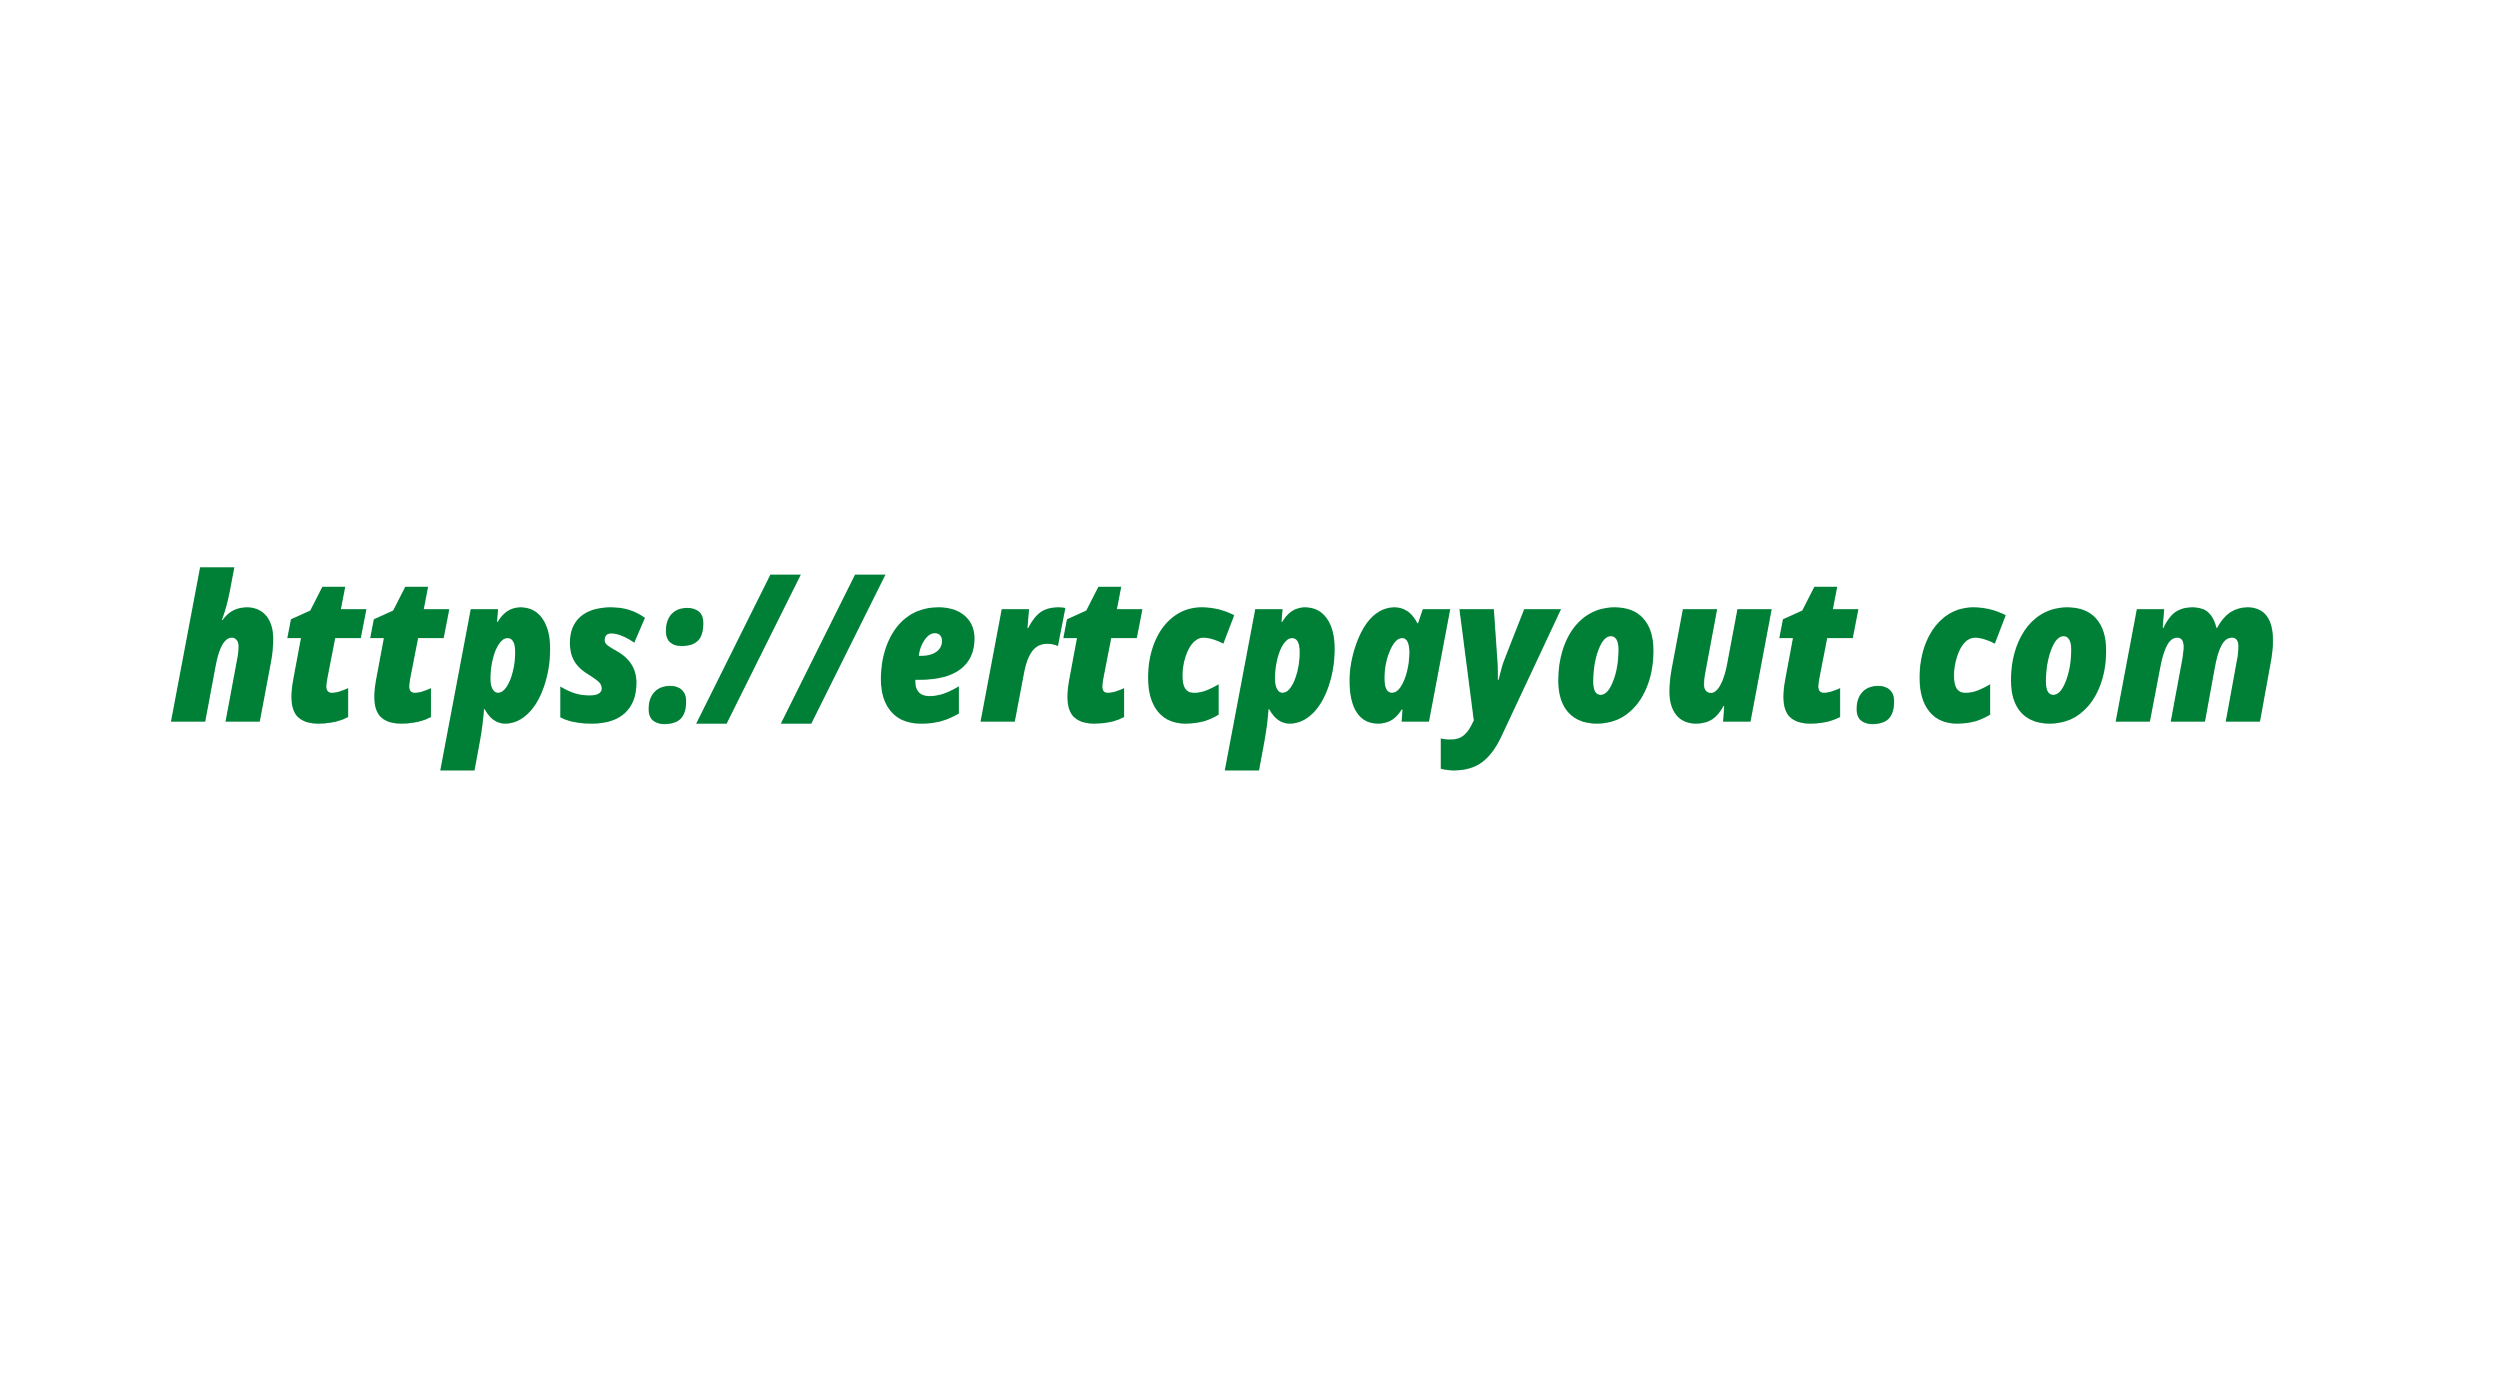 fastest-audit-proof-ertc-payout-application-expert-cpa-tax-refund-program